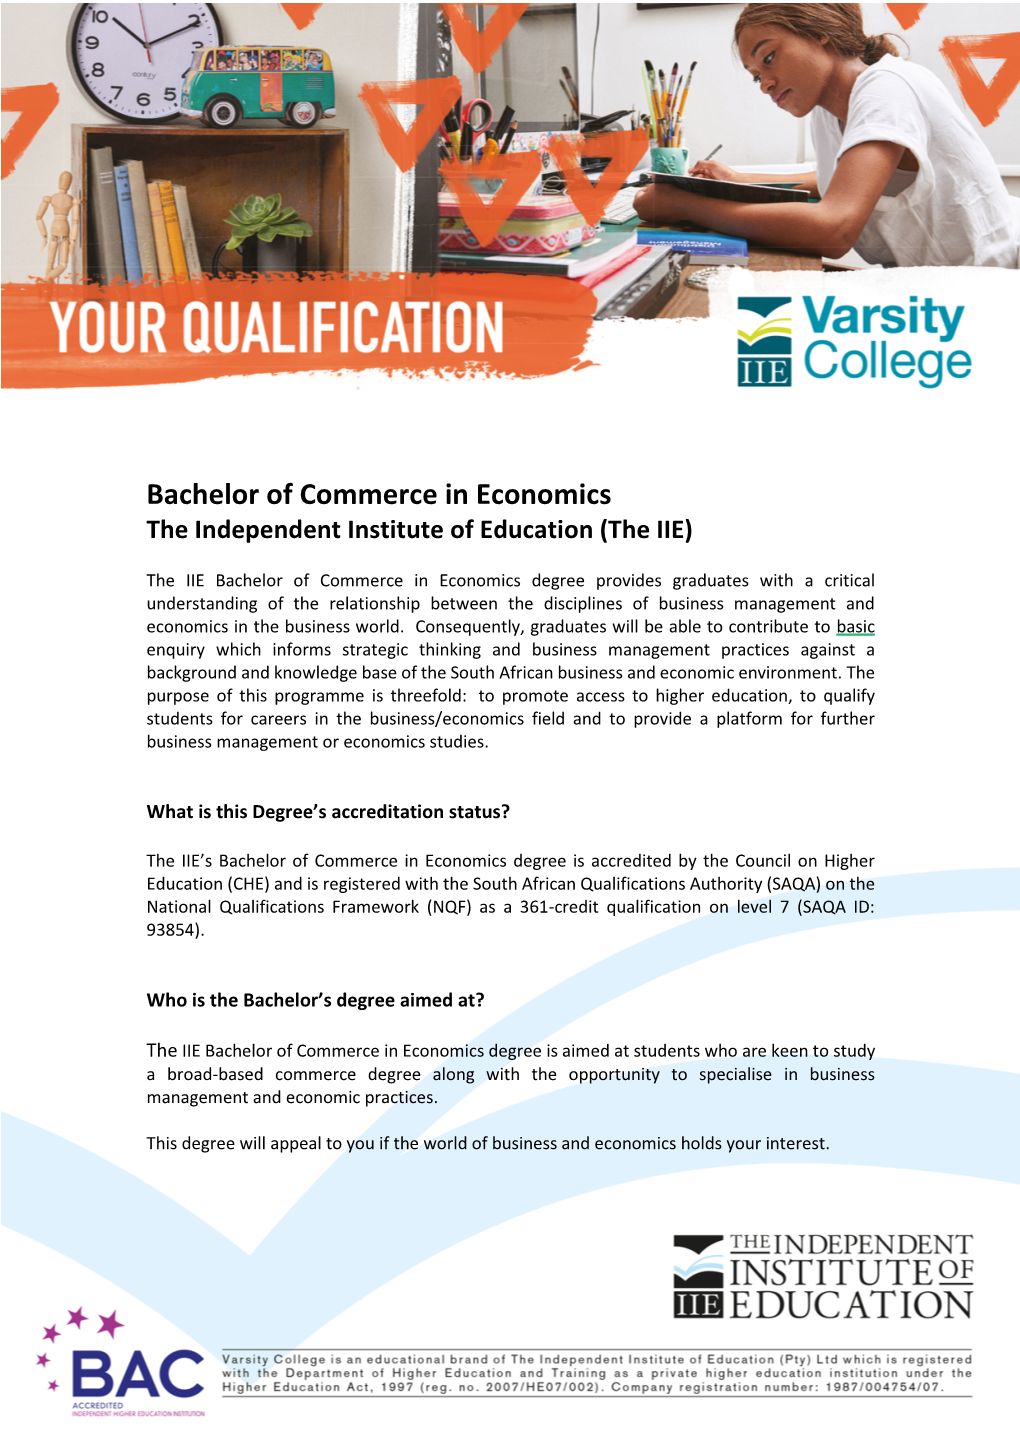 Bachelor of Commerce in Economics the Independent Institute of Education (The IIE)